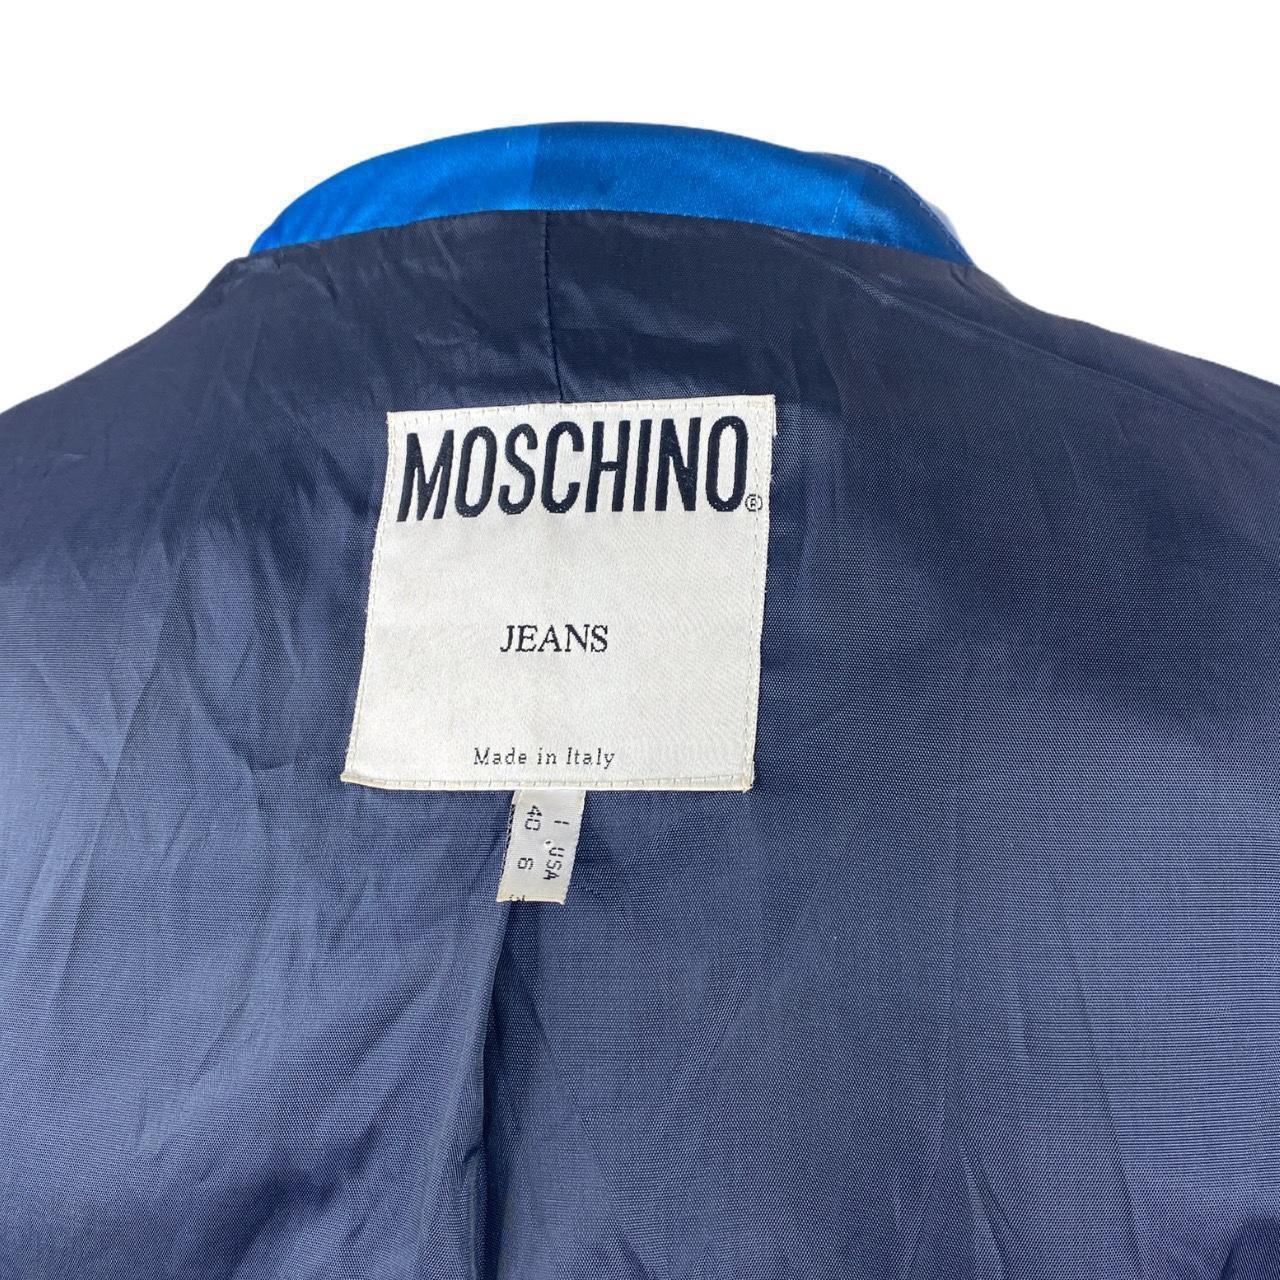 Moschino Blazer 

Blue Satin Square Jacket

CONDITION: This item is a vintage/pre-worn piece so some signs of natural wear and age are to be expected. However in good general condition

SIZE: 10

ACTUAL MEASUREMENTS:  Shoulder to Hem: 25